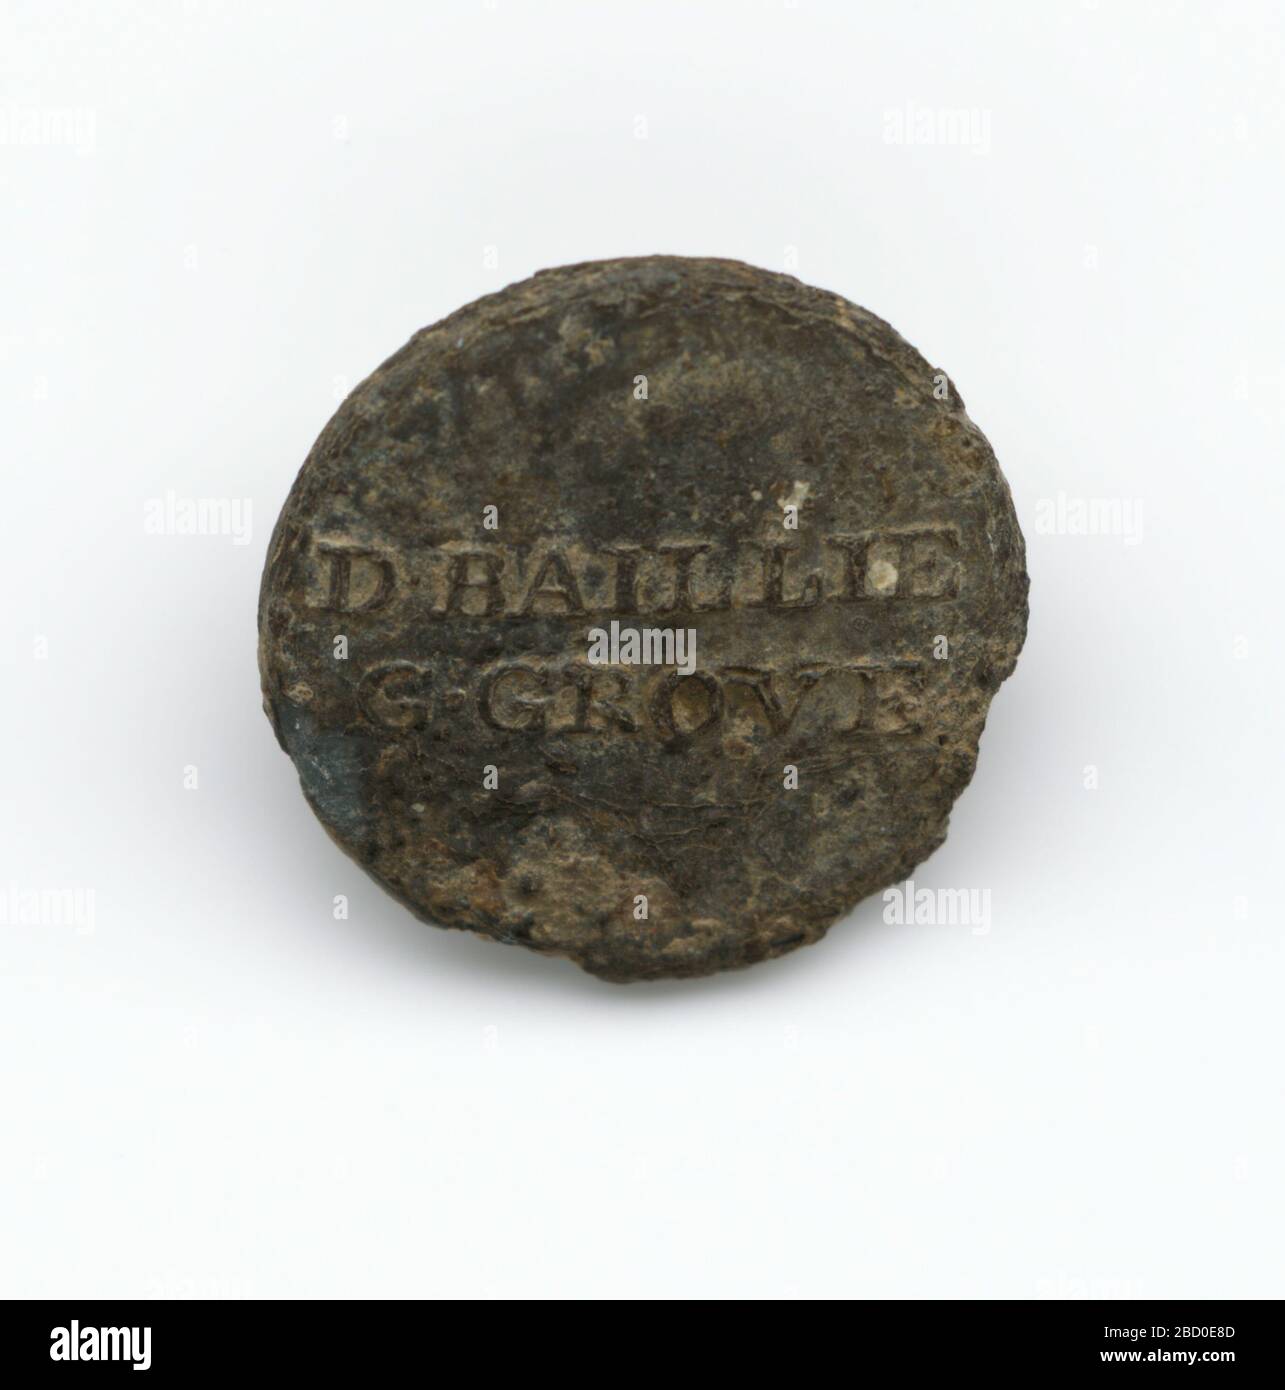 Identification button worn by enslaved persons on Golden Grove Plantation. A round pewter button with 'D BAILLIE / G•GROVE' stamped on the front. This button would have been sewn onto an enslaved person's shirt to identify him or her as belonging to David Baillie of Golden Grove Plantation, British Guyana. Identification button worn by enslaved persons on Golden Grove Plantation Stock Photo